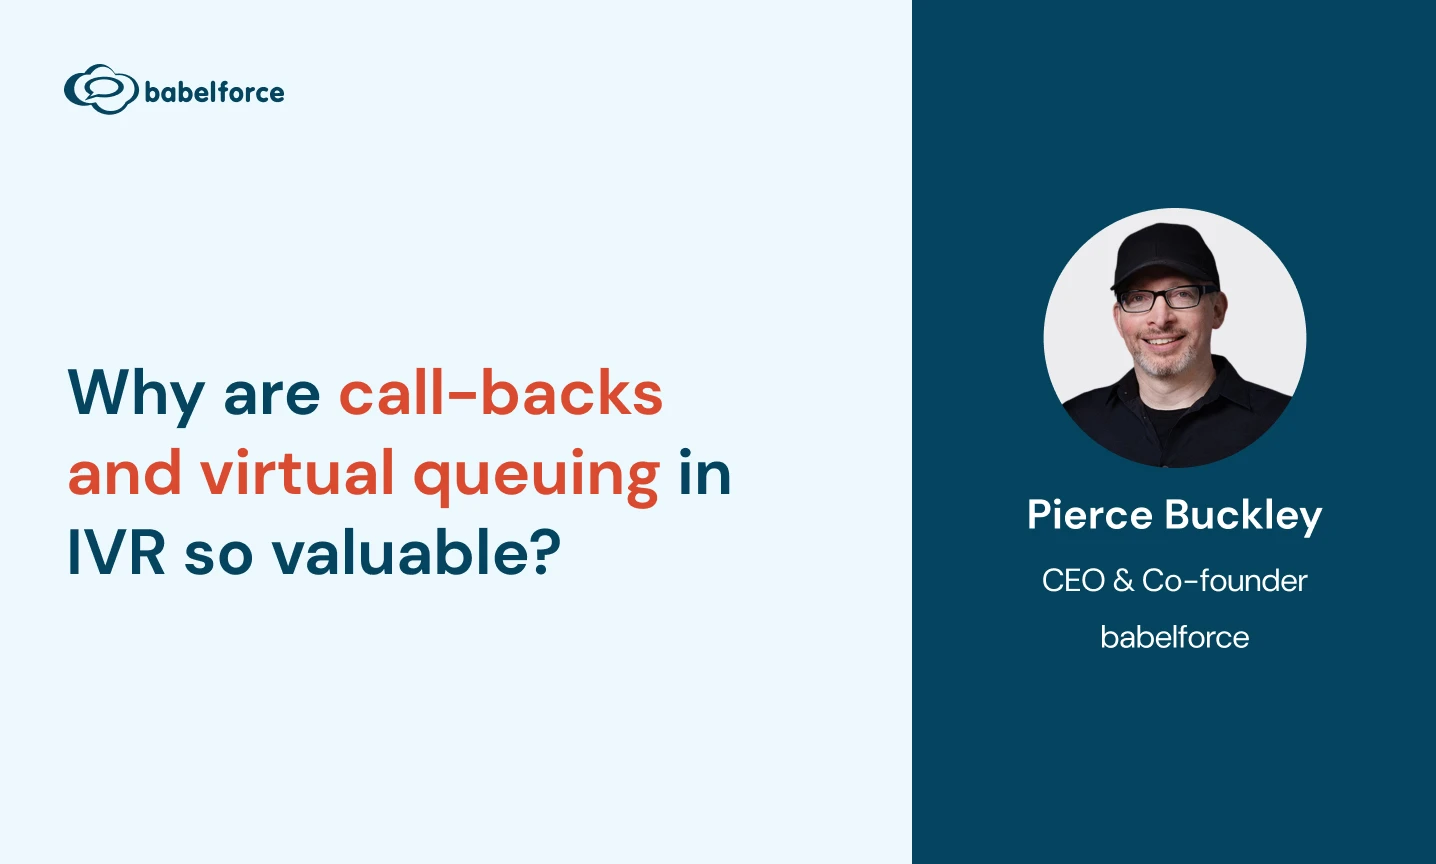 Why are call-backs and virtual queueing in IVR so valuable?